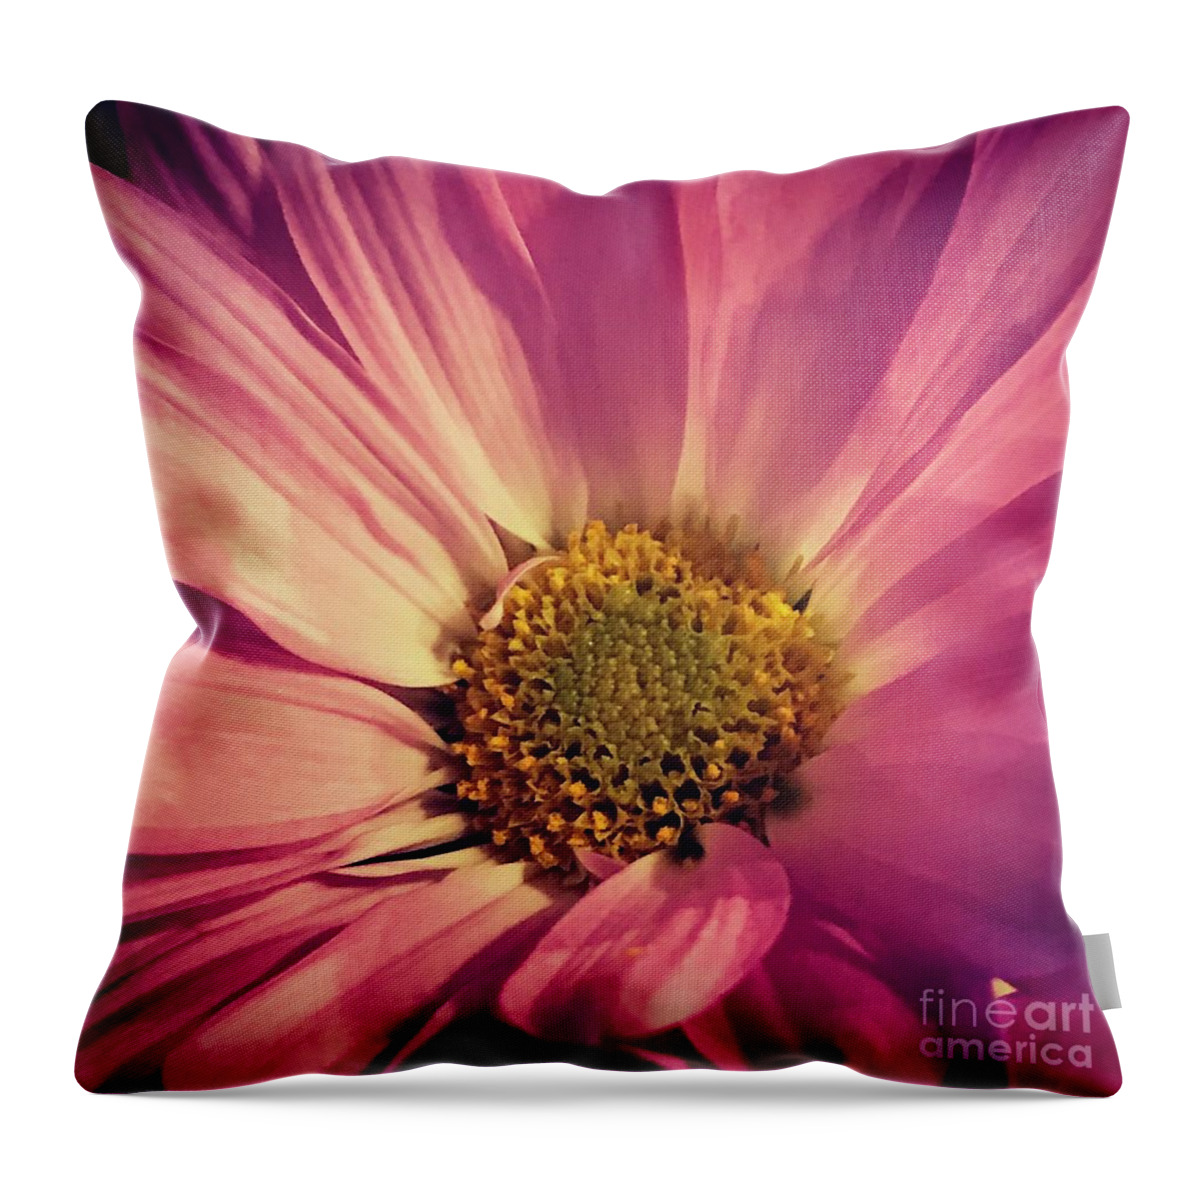 Pink Throw Pillow featuring the photograph Flower #4 by Deena Withycombe